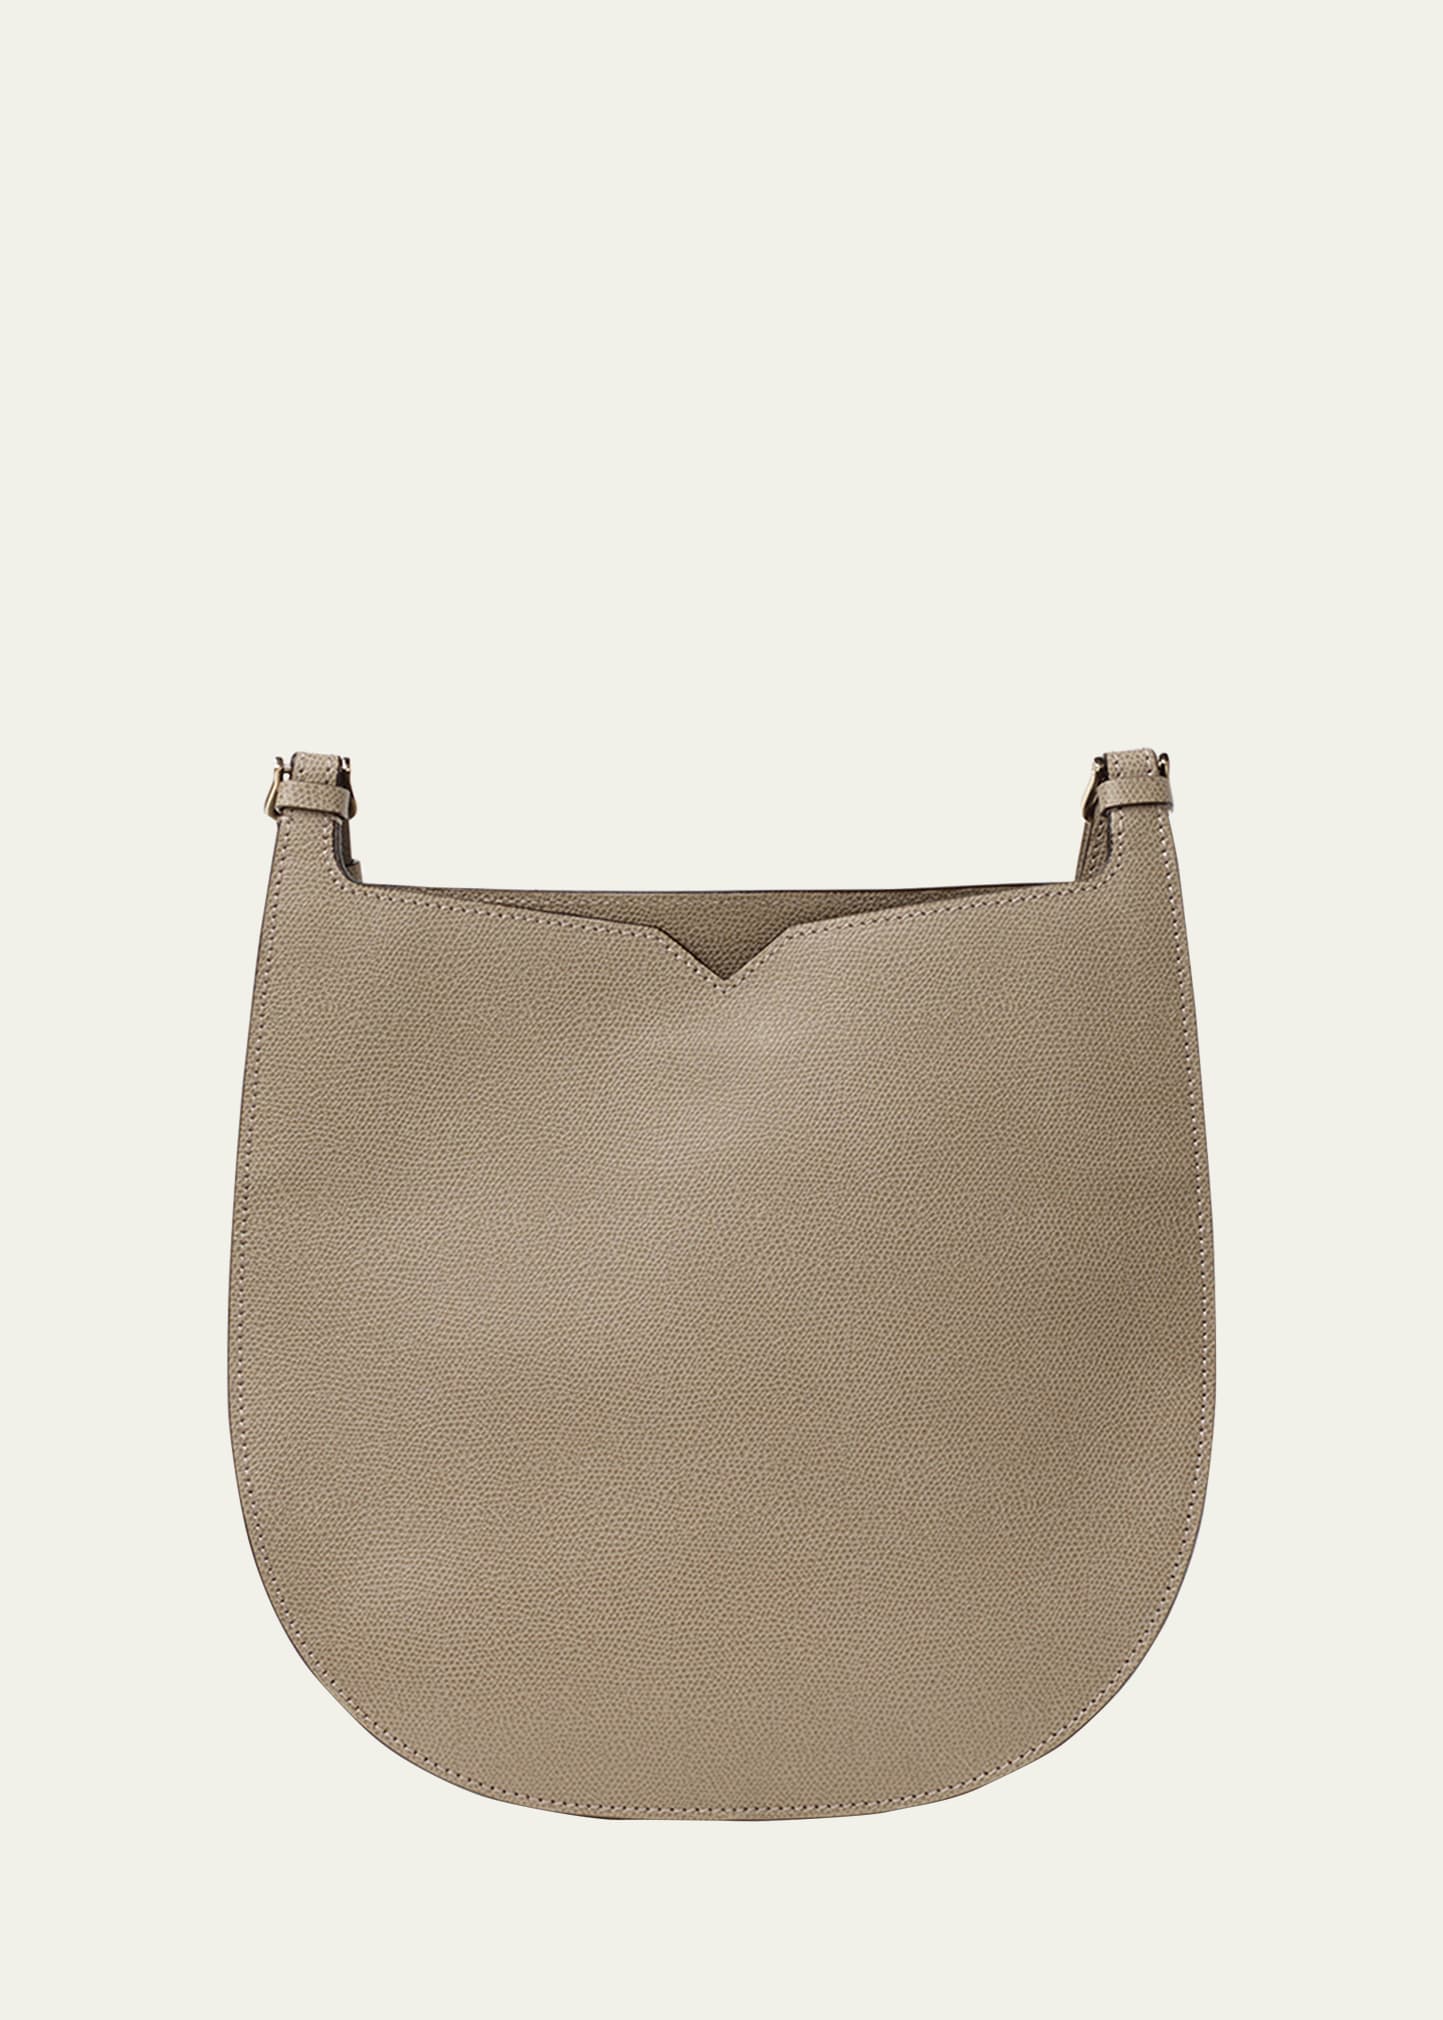 Valextra Saffiano Weekend Hobo Bag In Mo Oyster